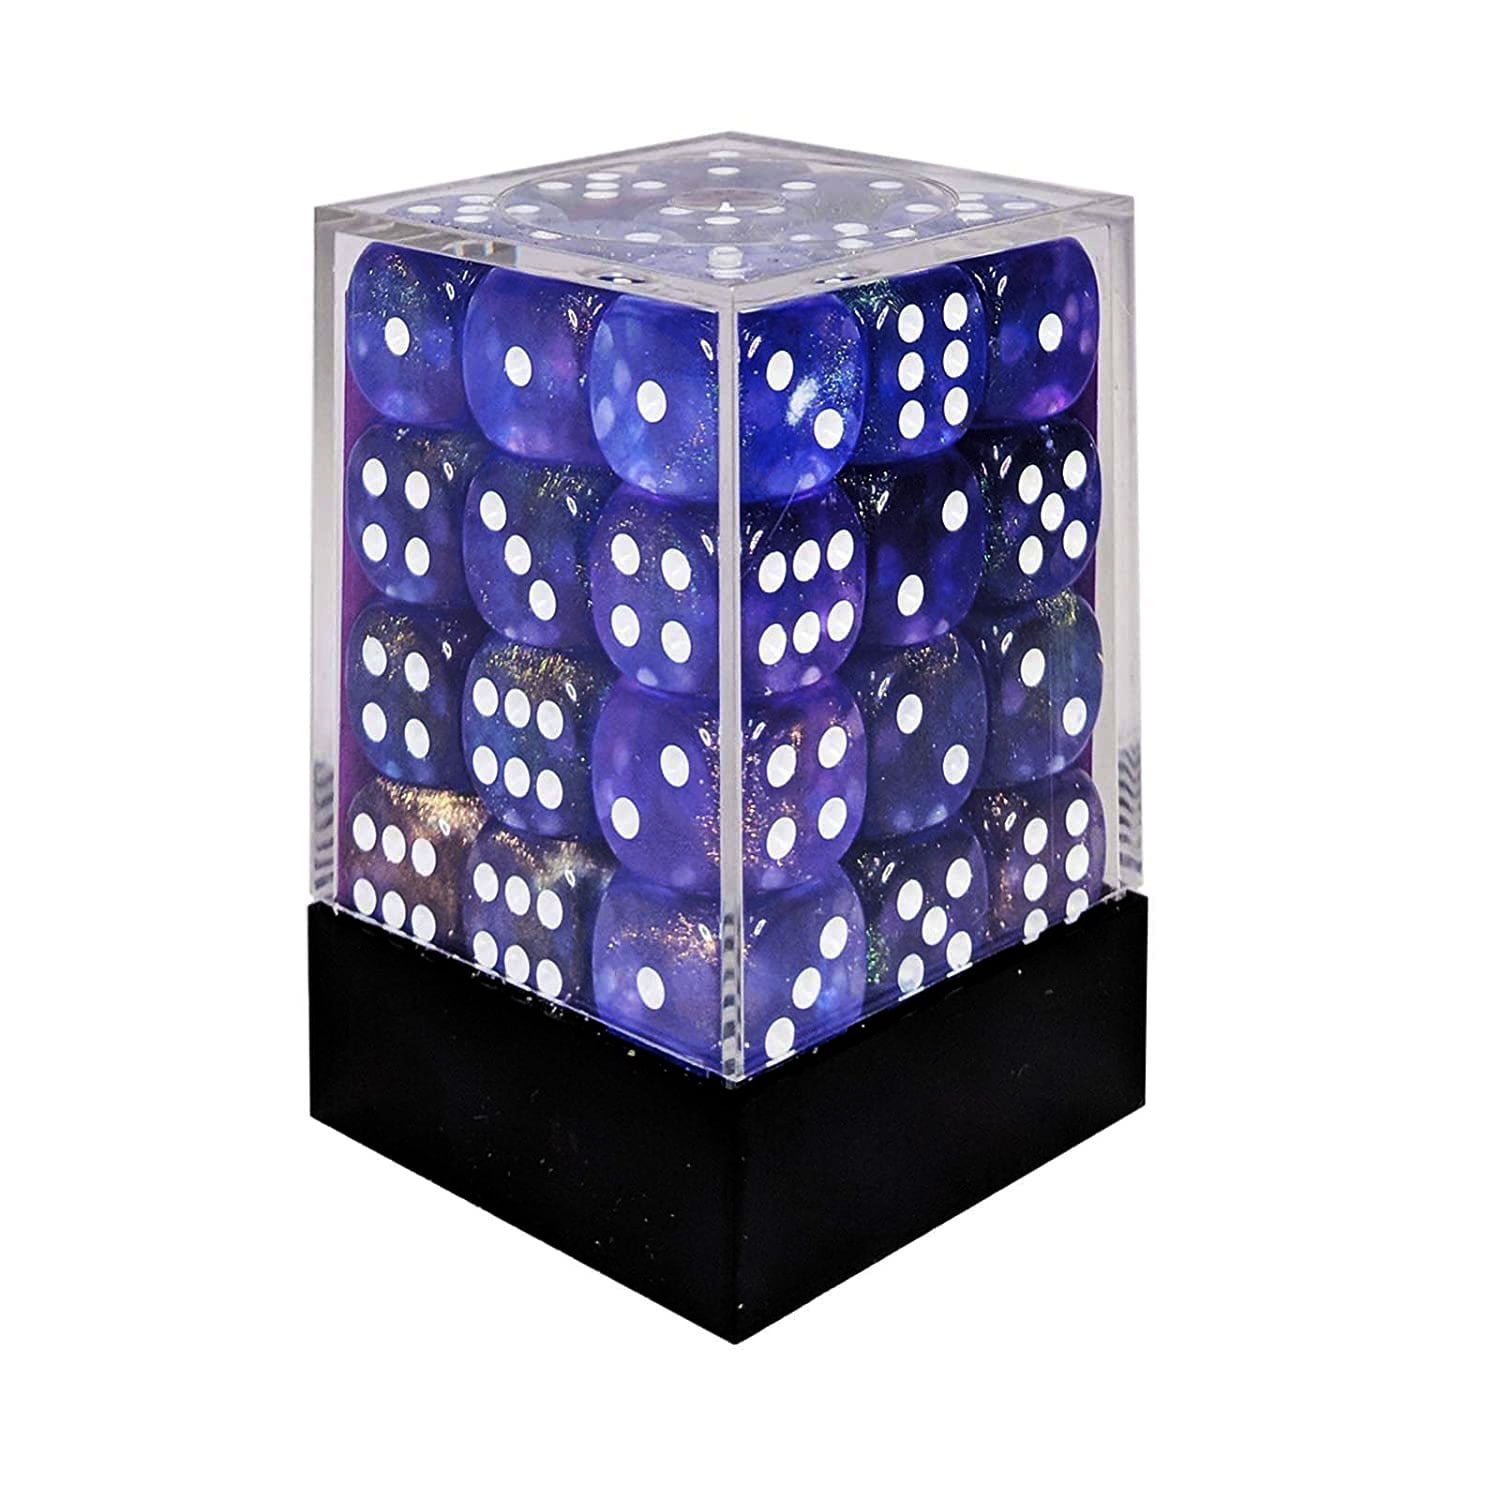 Purple with White Pips 36 Dice Borealis 12mm D6 Chessex Dice Block 